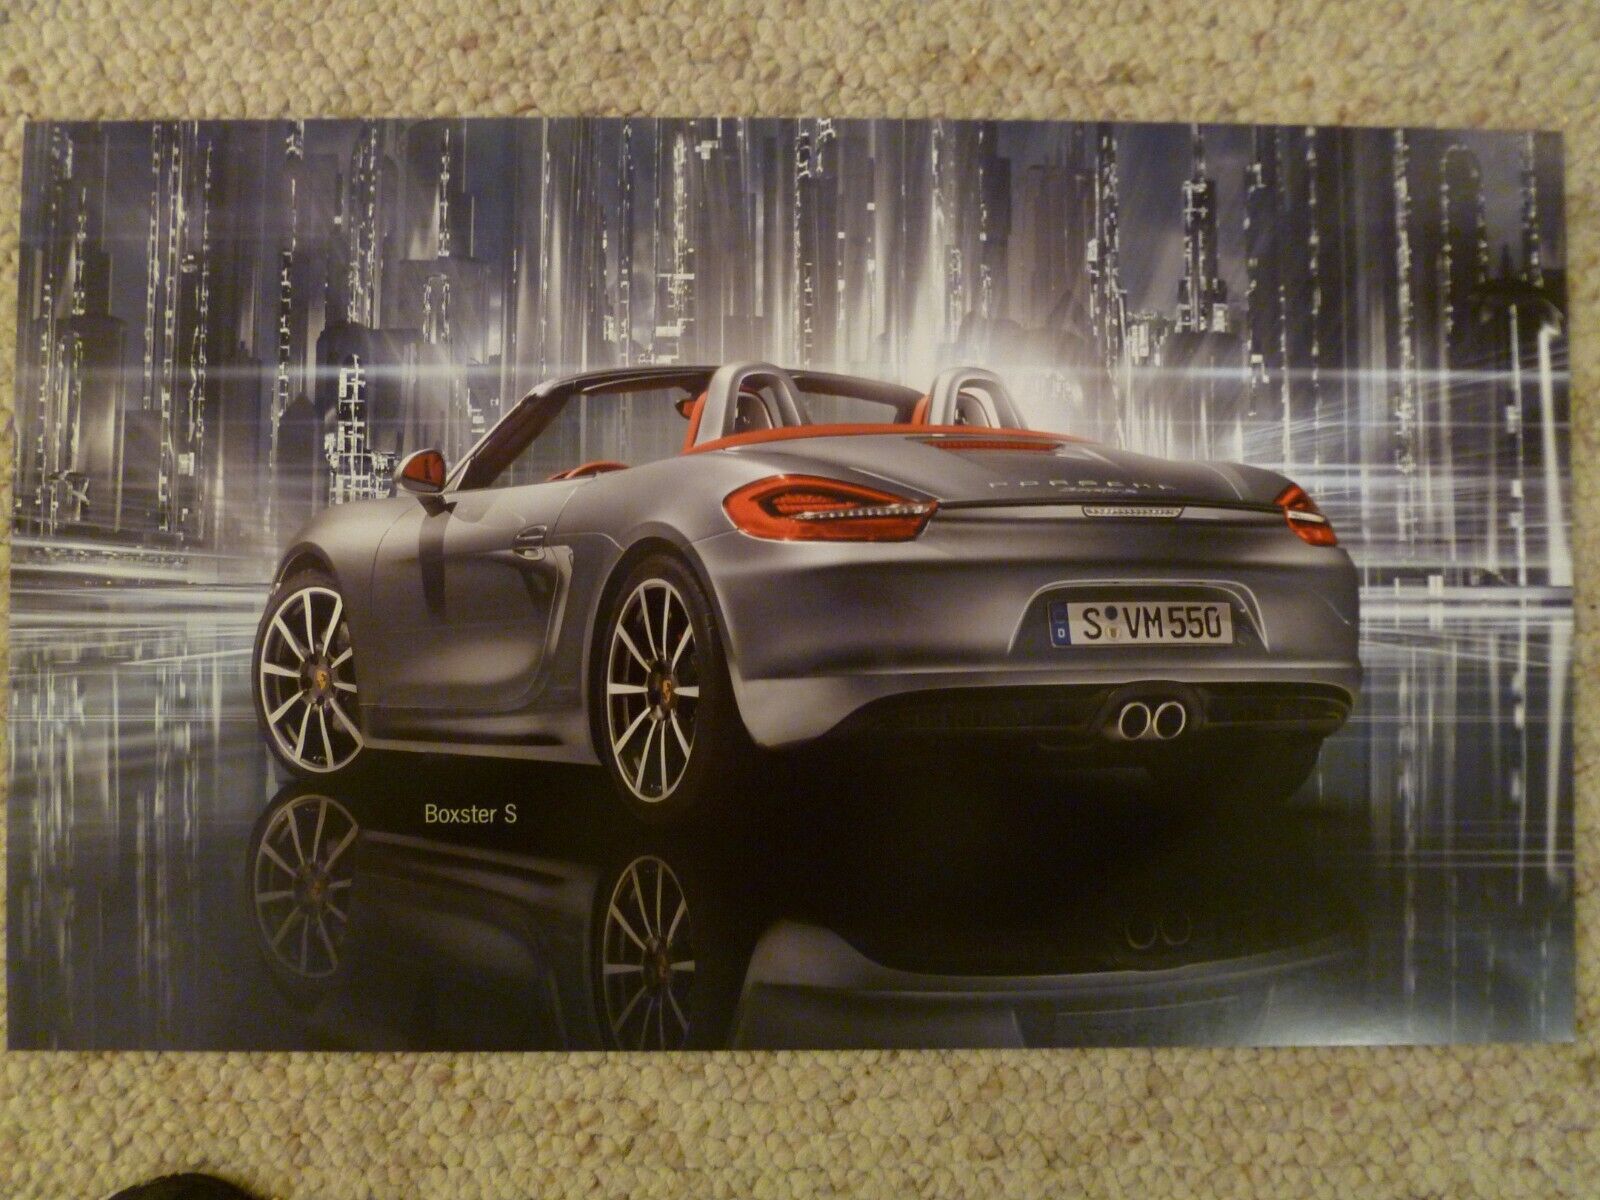 Porsche Boxster S Roadster Showroom Advertising Poster - RARE Awesome Frameable